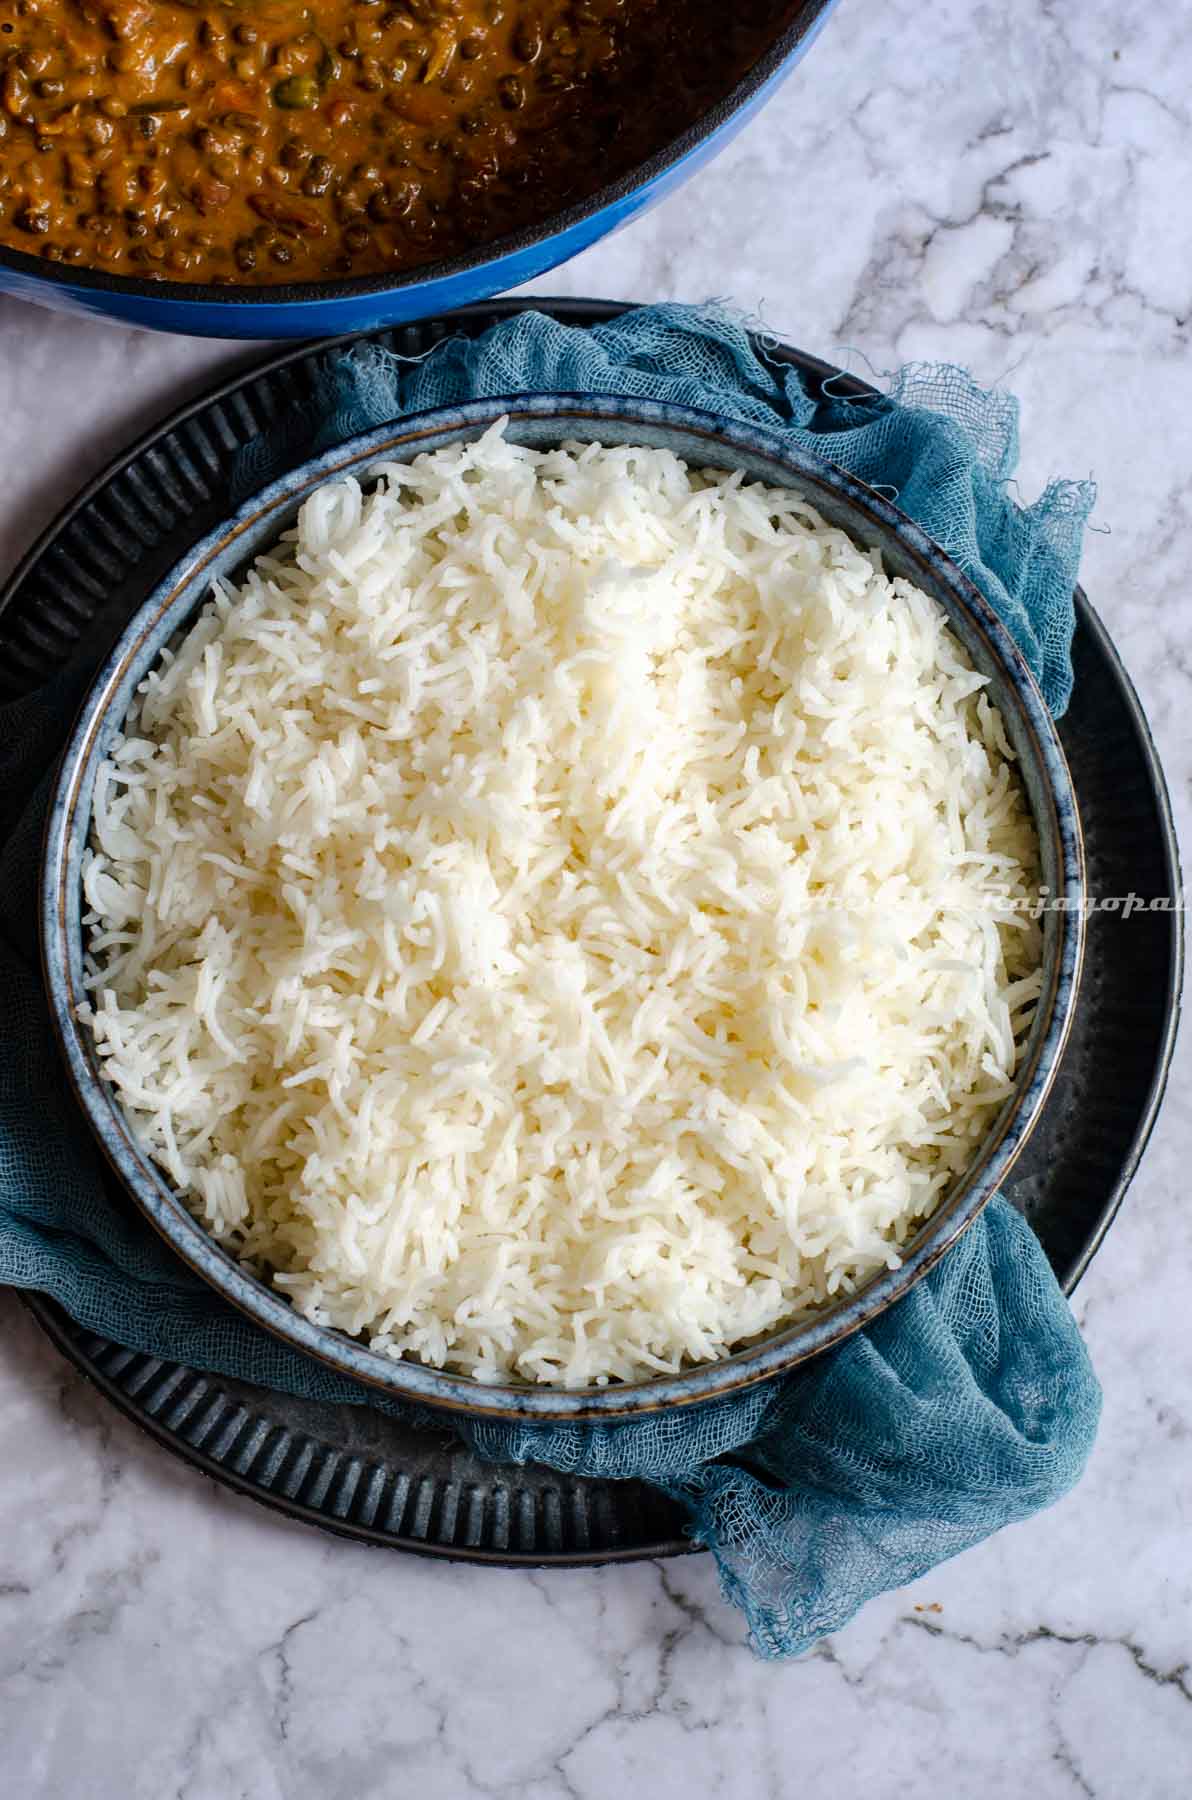 Perfectly cooked basmati rice done in the instant pot